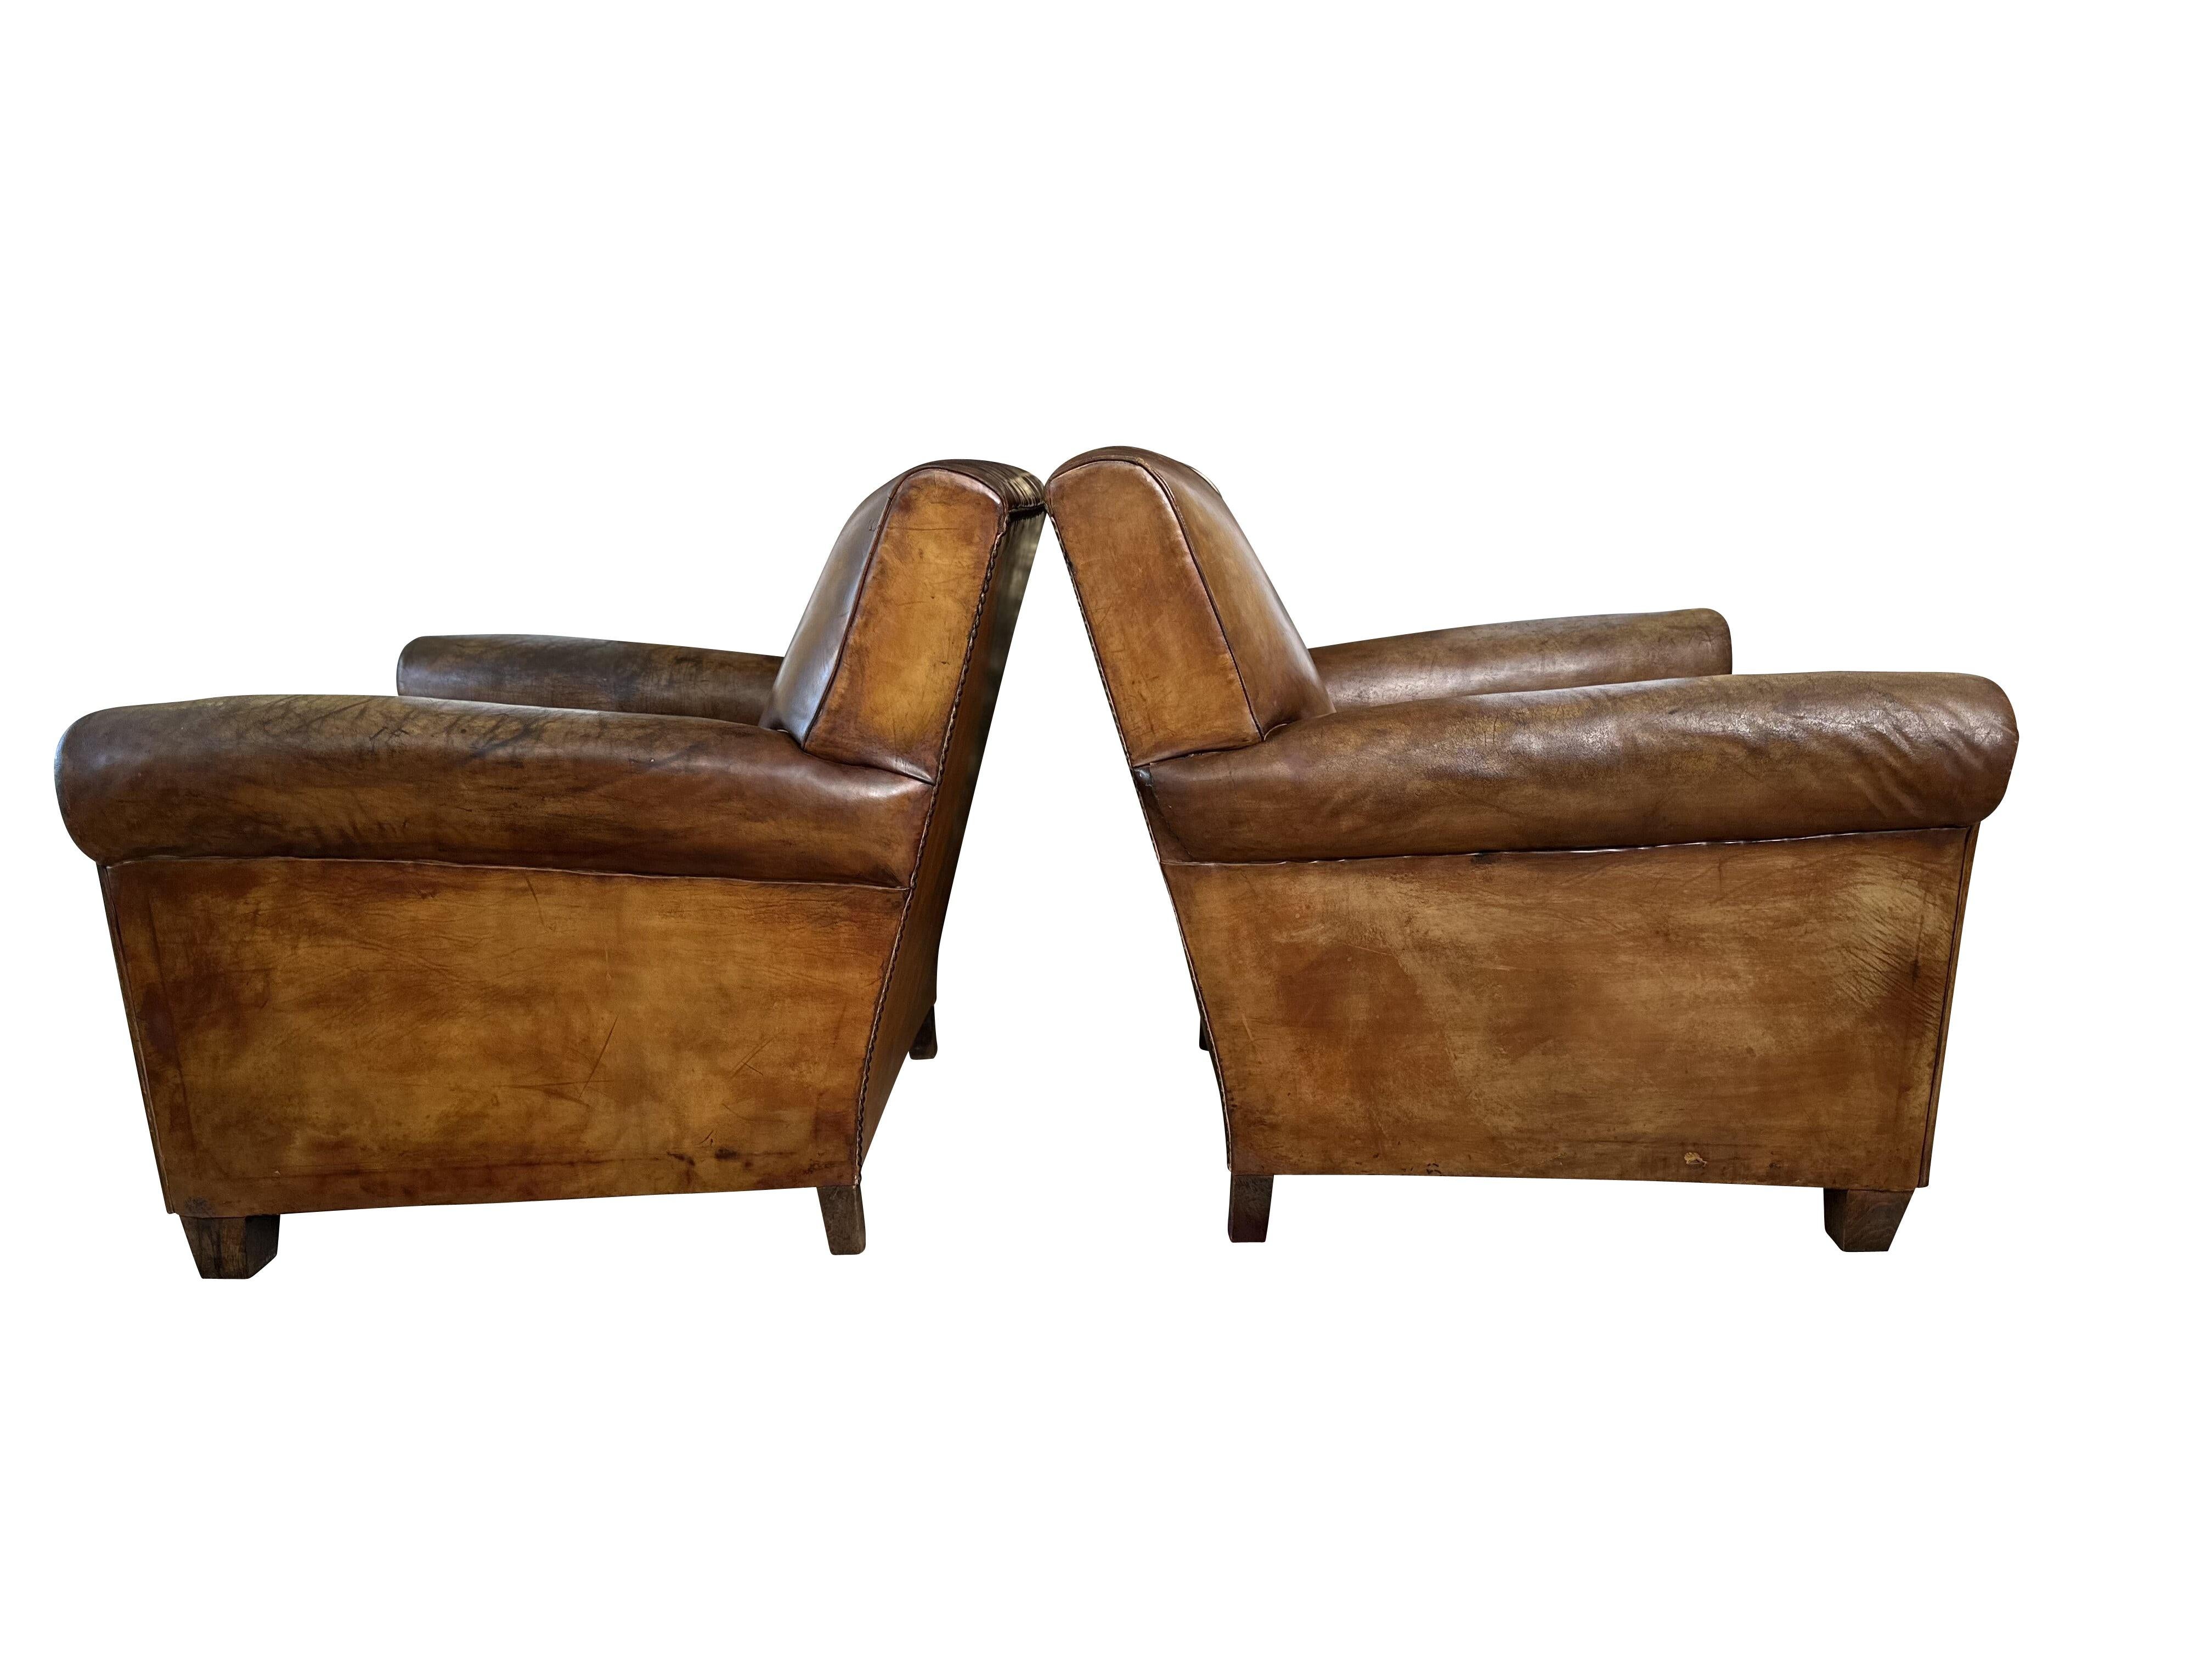 1930's Vintage Art Deco Leather Club Chairs - A Pair For Sale 2